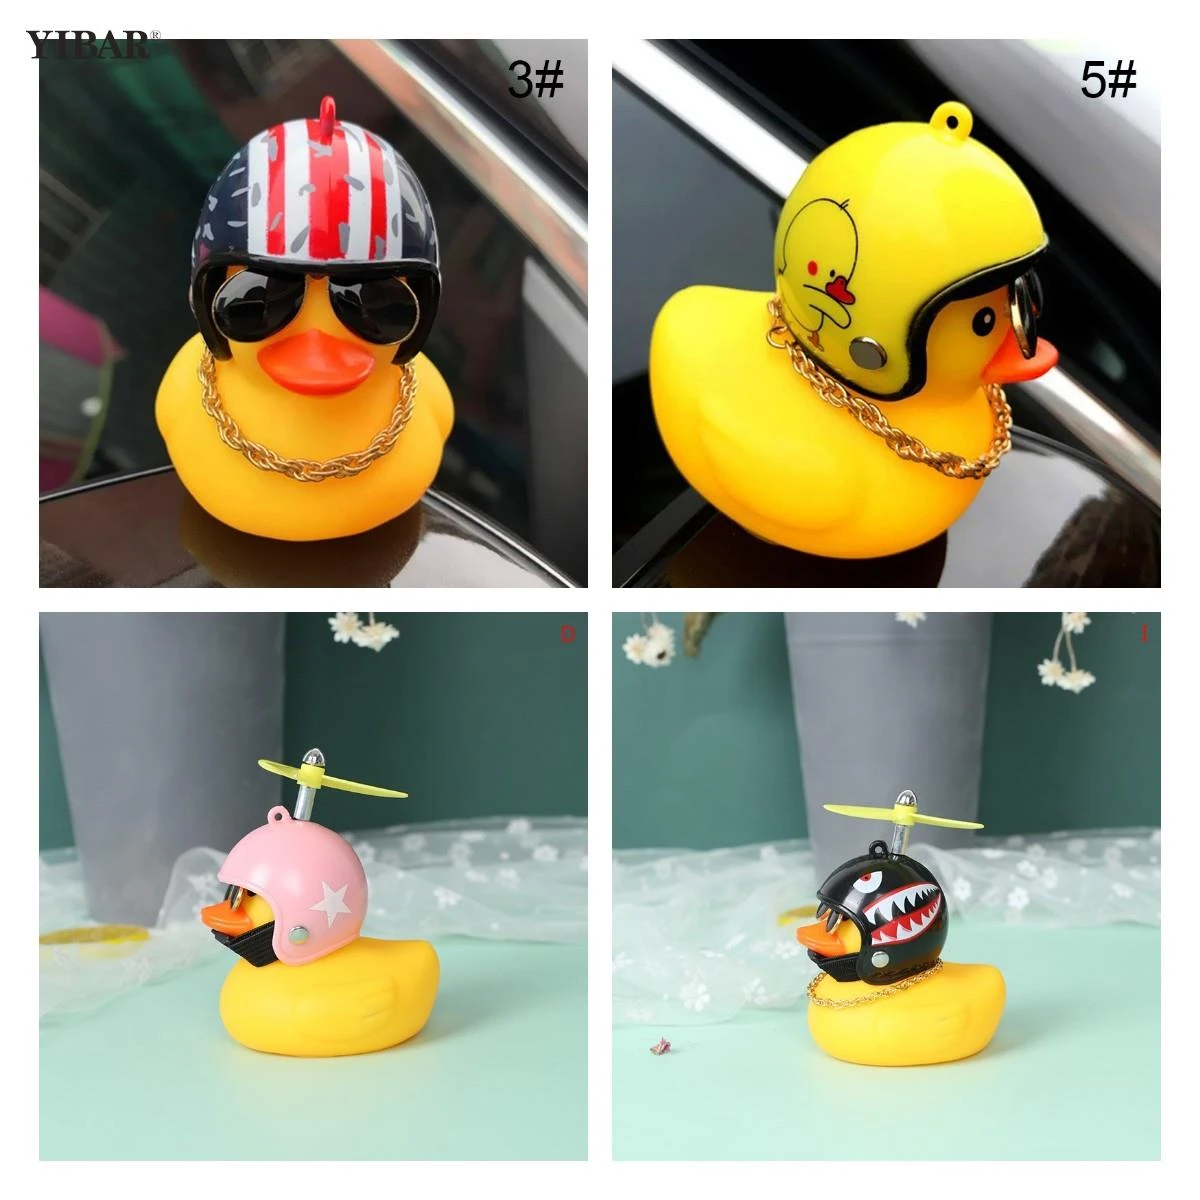 Multi Type Car Goods Gift Wind-breaking Wave-breaking Duck For Car Ornaments Auto Interior Decoration With Lamp/Without Lamp